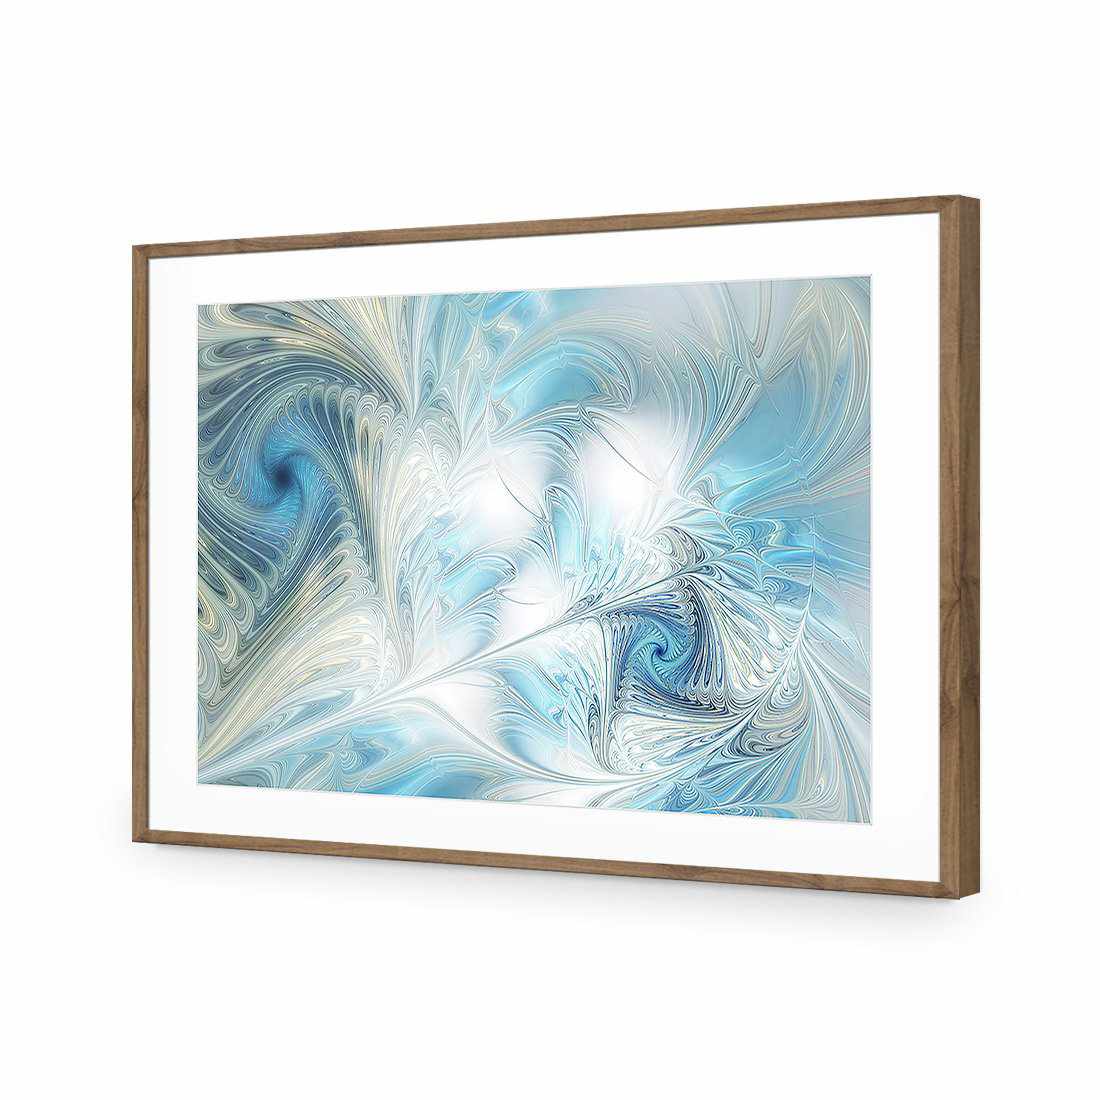 Travesty-Acrylic-Wall Art Design-With Border-Acrylic - Natural Frame-45x30cm-Wall Art Designs